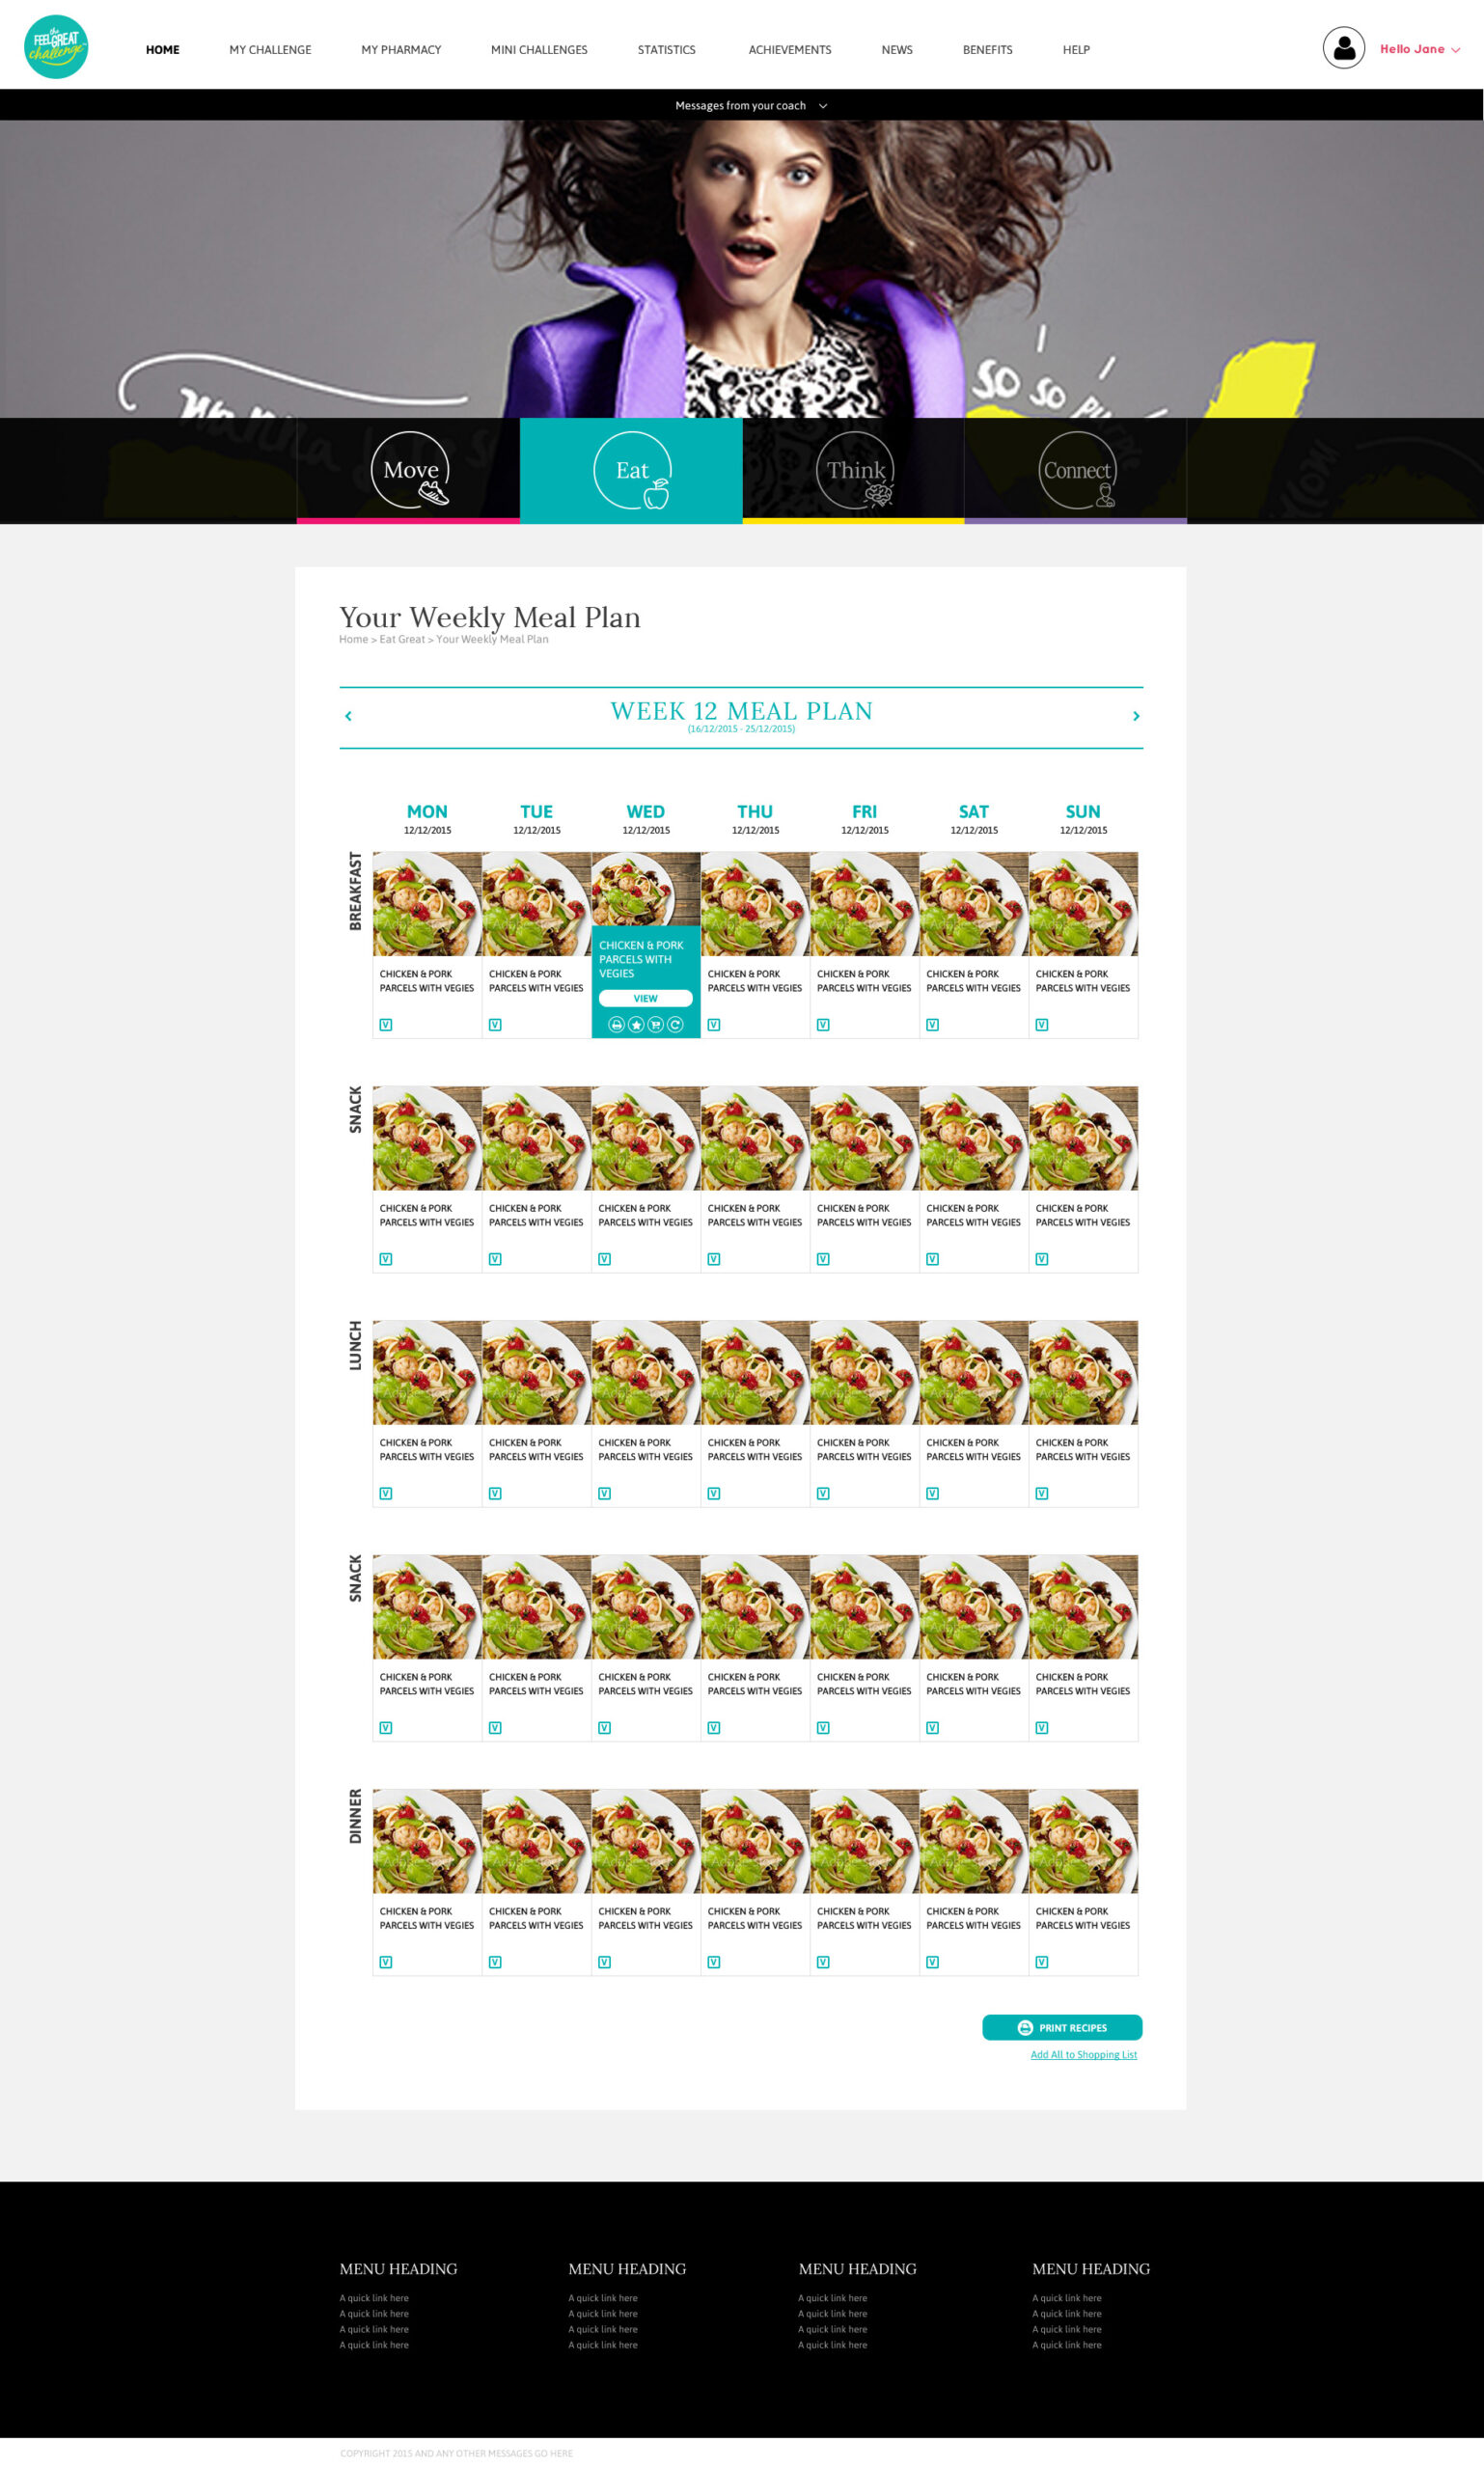 Weekly meal plan screen in Eat Great section.